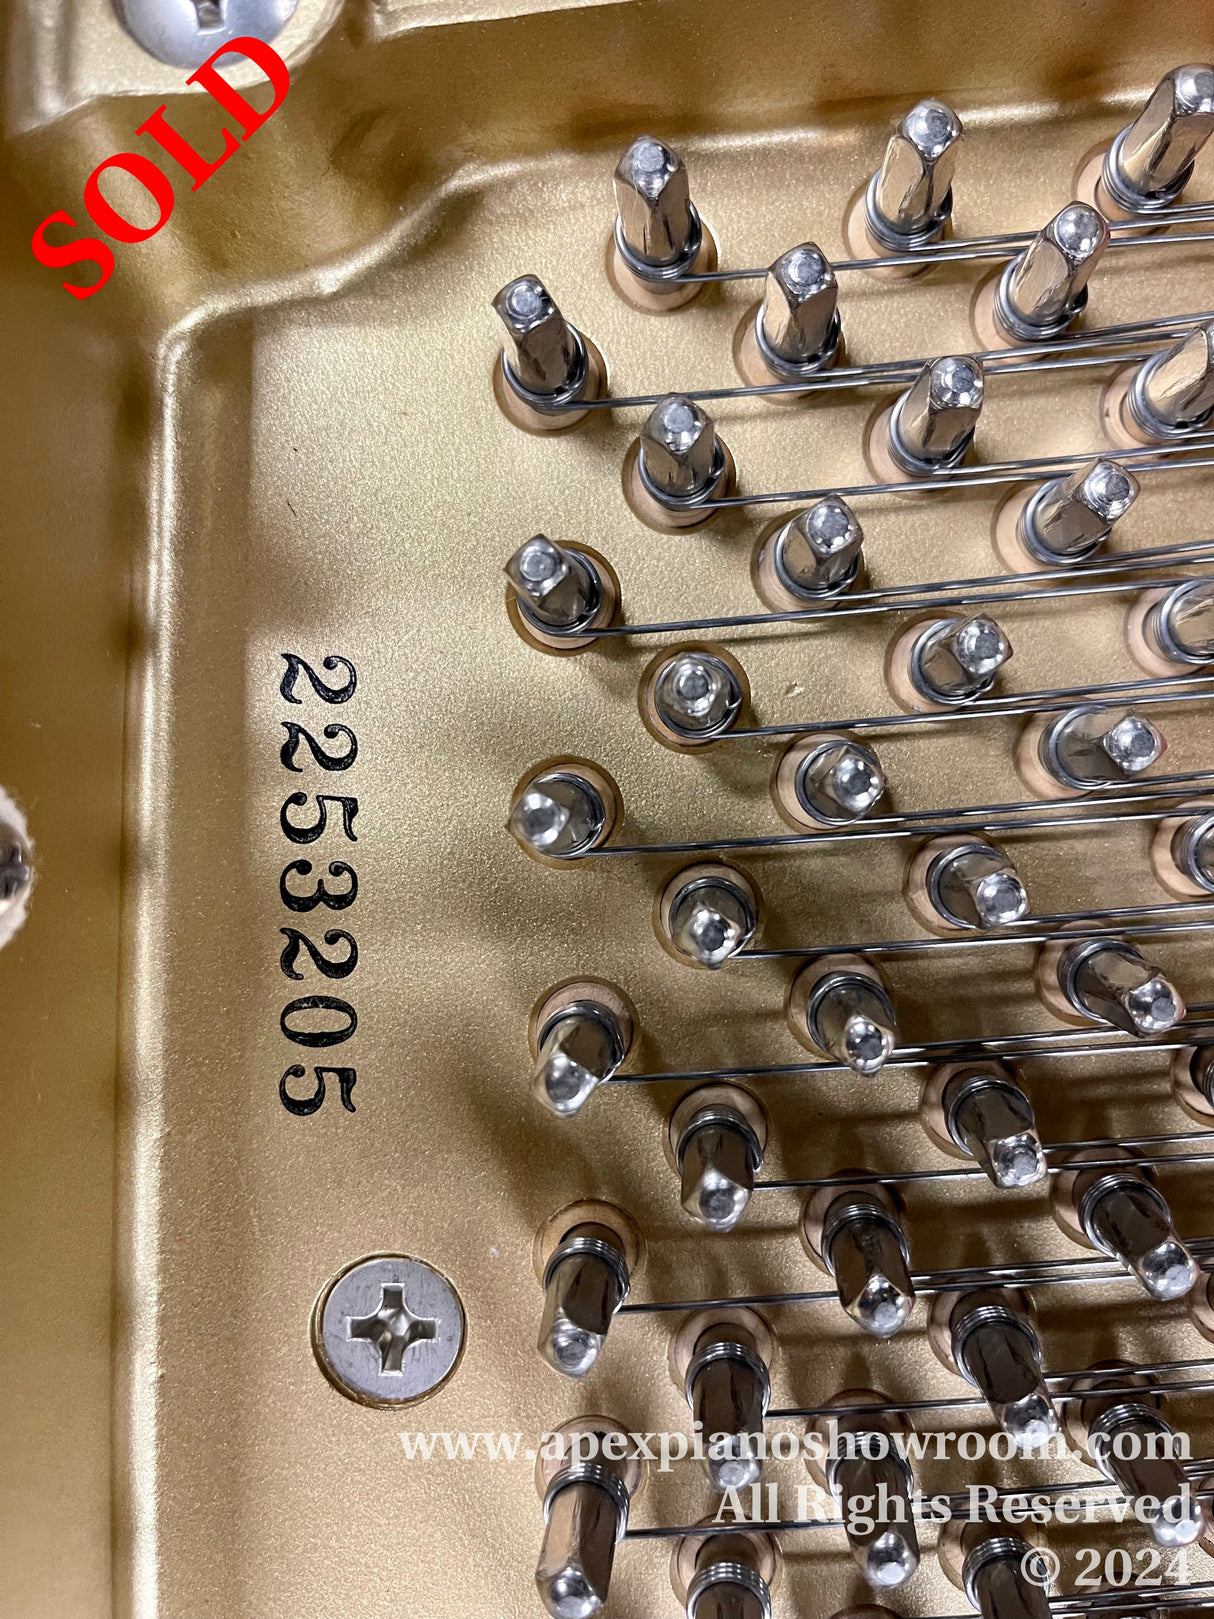 Close-up of a piano's gold-painted cast iron plate showing tuning pins and strings, along with a serial number 2523205 imprinted on the plate, indicative of precision engineering in piano manufacturing.